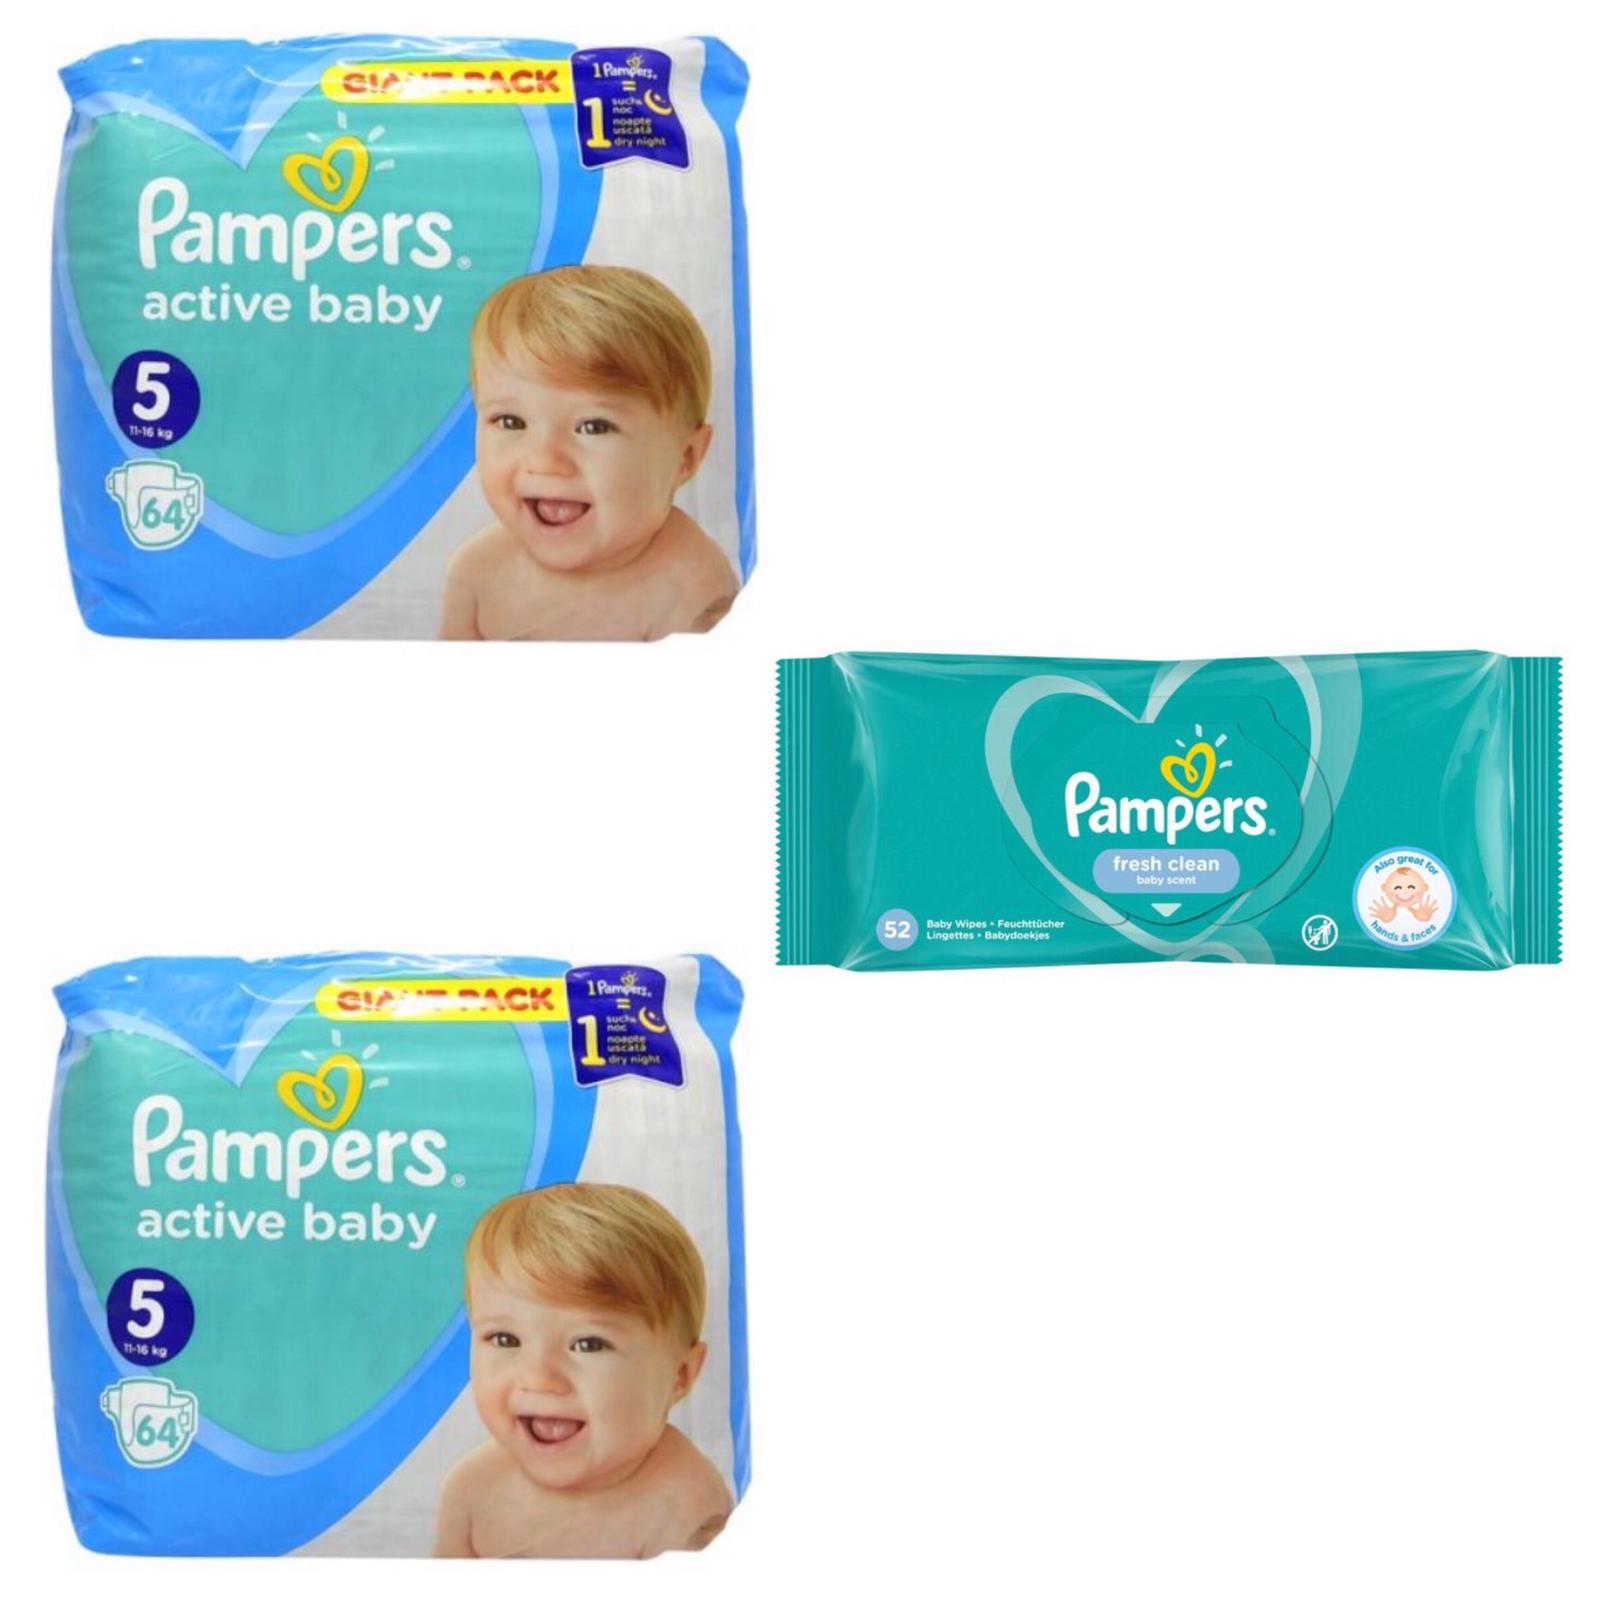 cube penalty pink Pachet 2 x Scutece Pampers Active Baby nr. 5, 11-16 kg, 64 buc + Servetele  umede Pampers Fresh Clean, 1 x 52buc - eMAG.ro